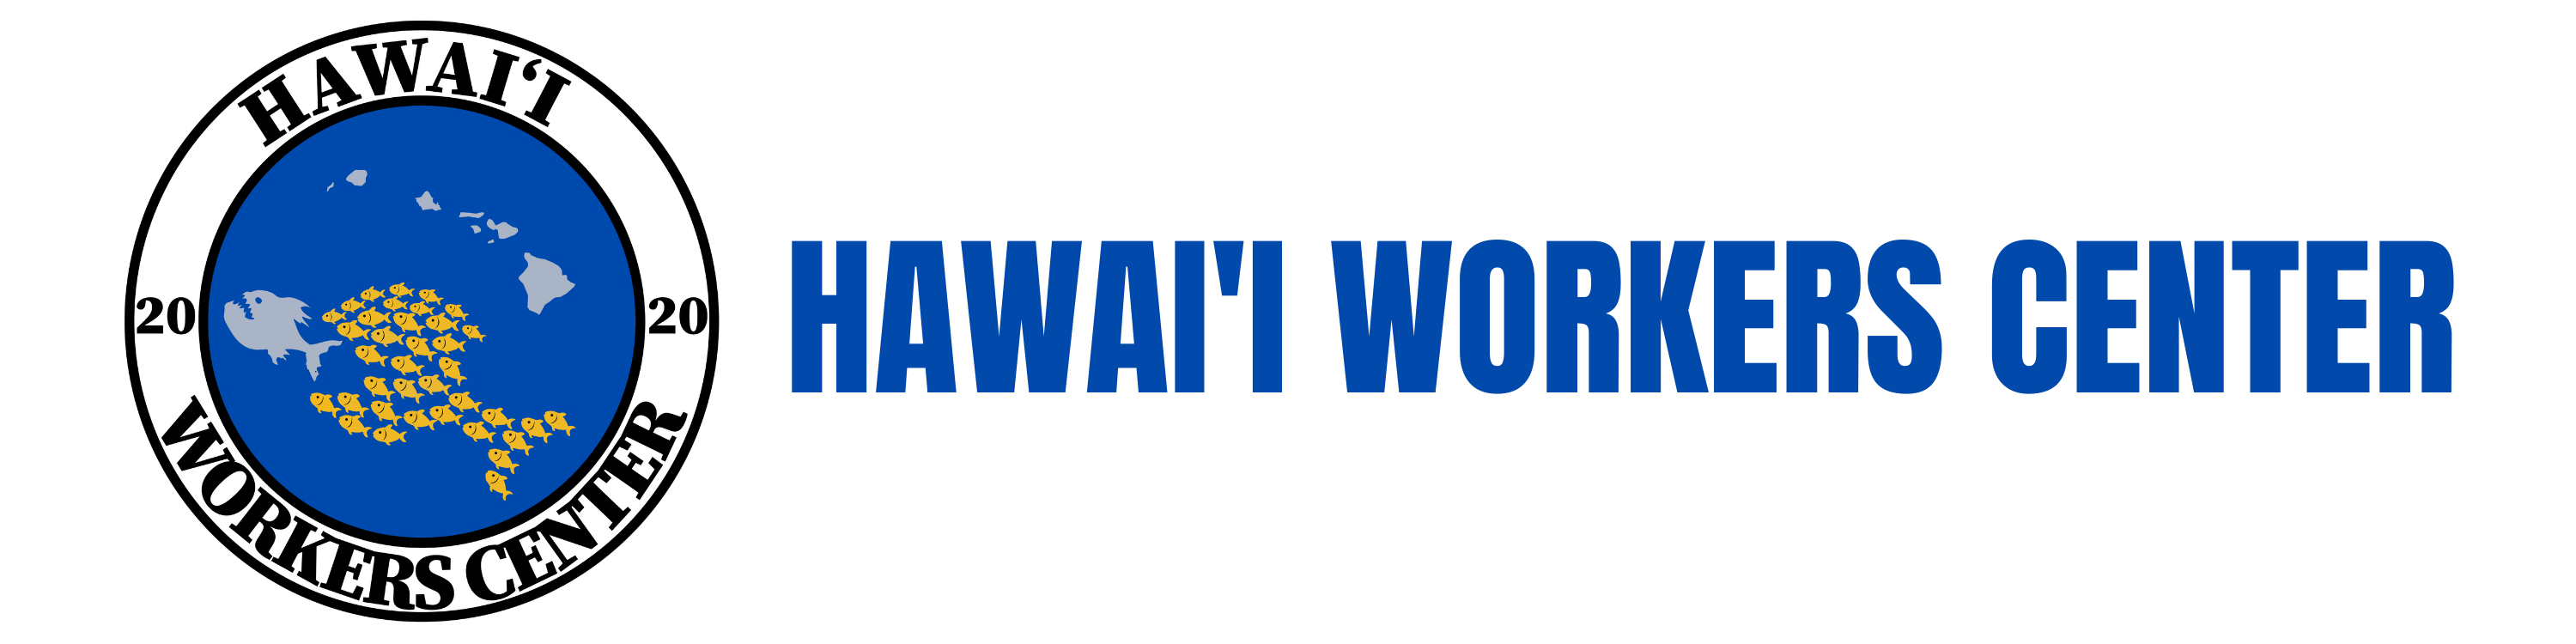 Maui Tenants and Workers Association – Hawai'i Workers Center